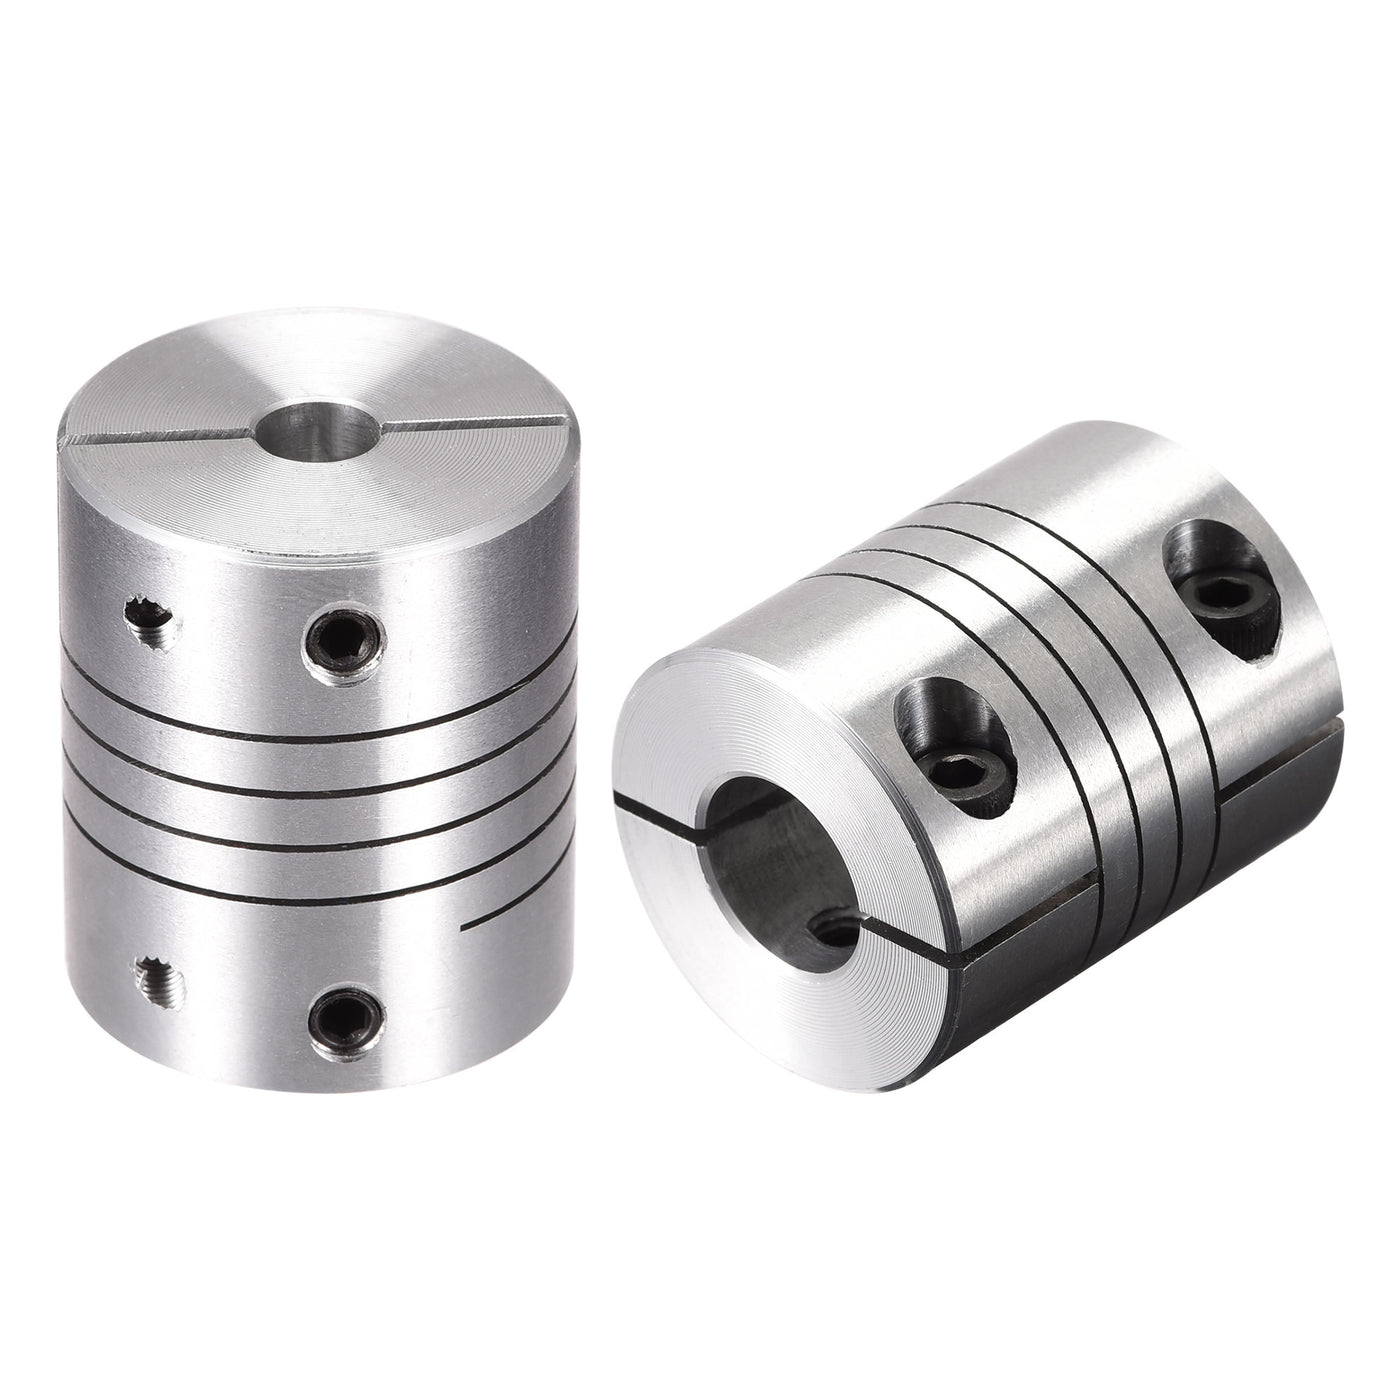 uxcell Uxcell 2PCS Motor Shaft 6mm to 11mm Helical Beam Coupler Coupling 25mm Dia 30mm Length